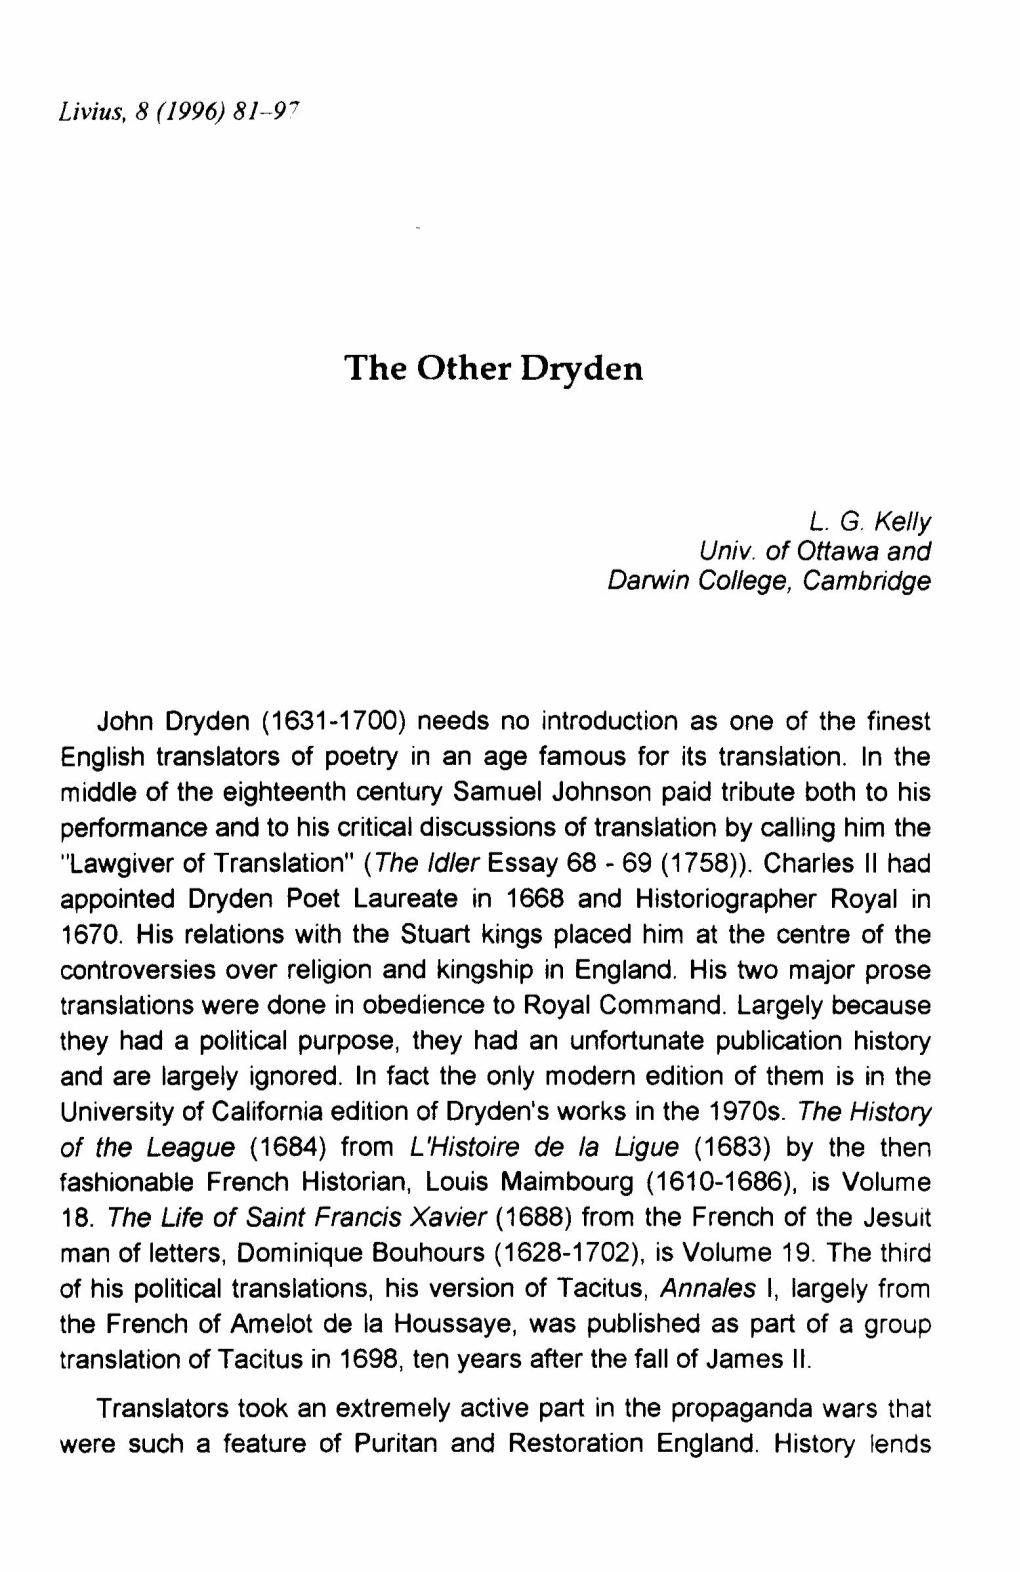 The Other Dryden